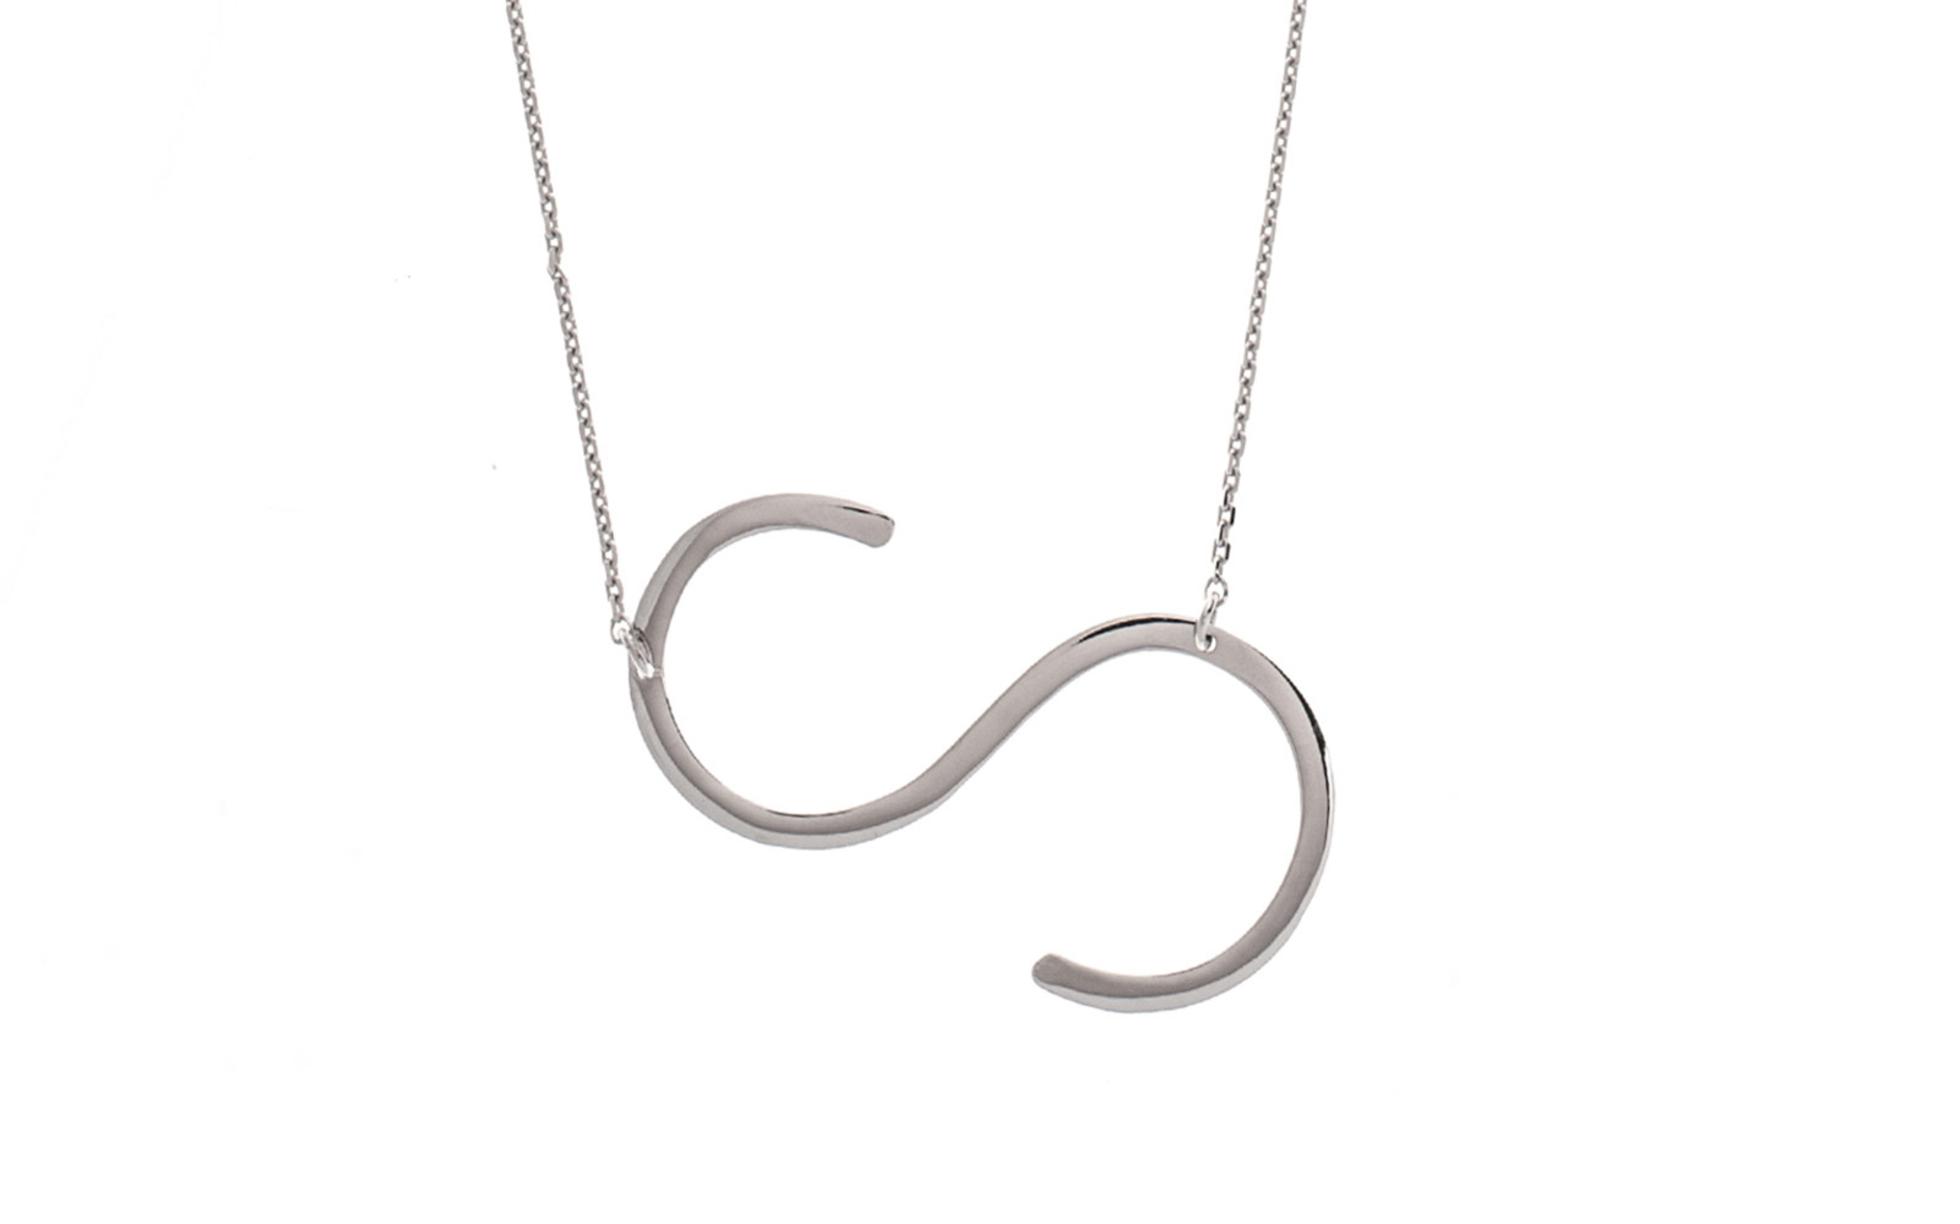 Large Angled "S" Initial Necklace in Sterling Silver